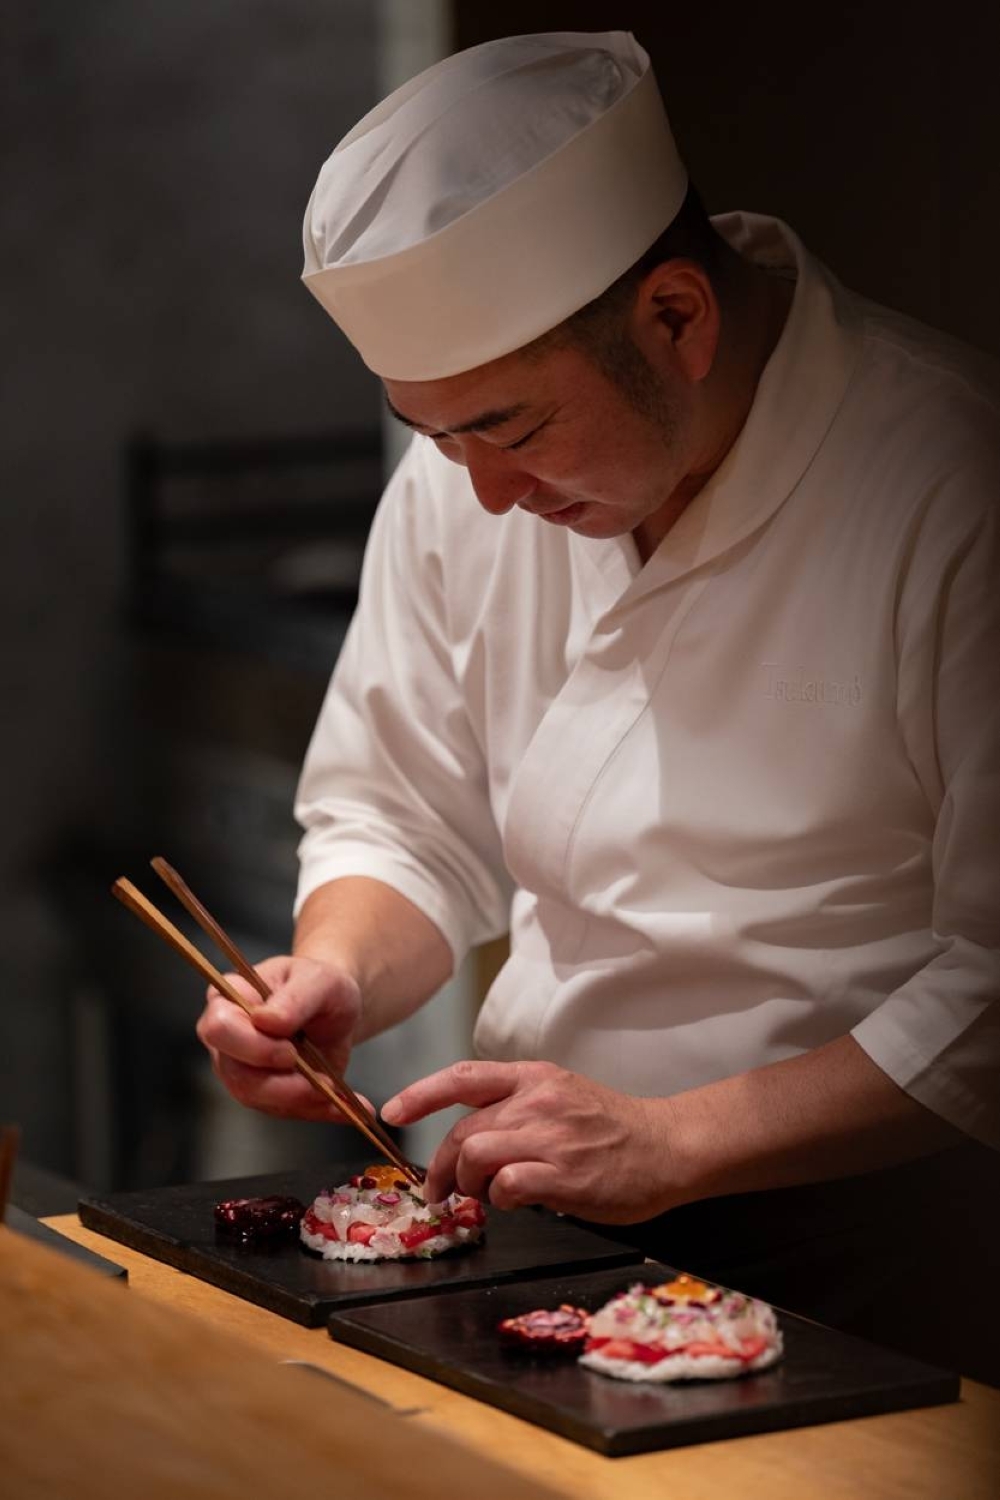 Chef Nishihara apprenticed for 10 years at Kyoto’s esteemed Kitcho Arashiyama and later spent six years abroad in New York and London.